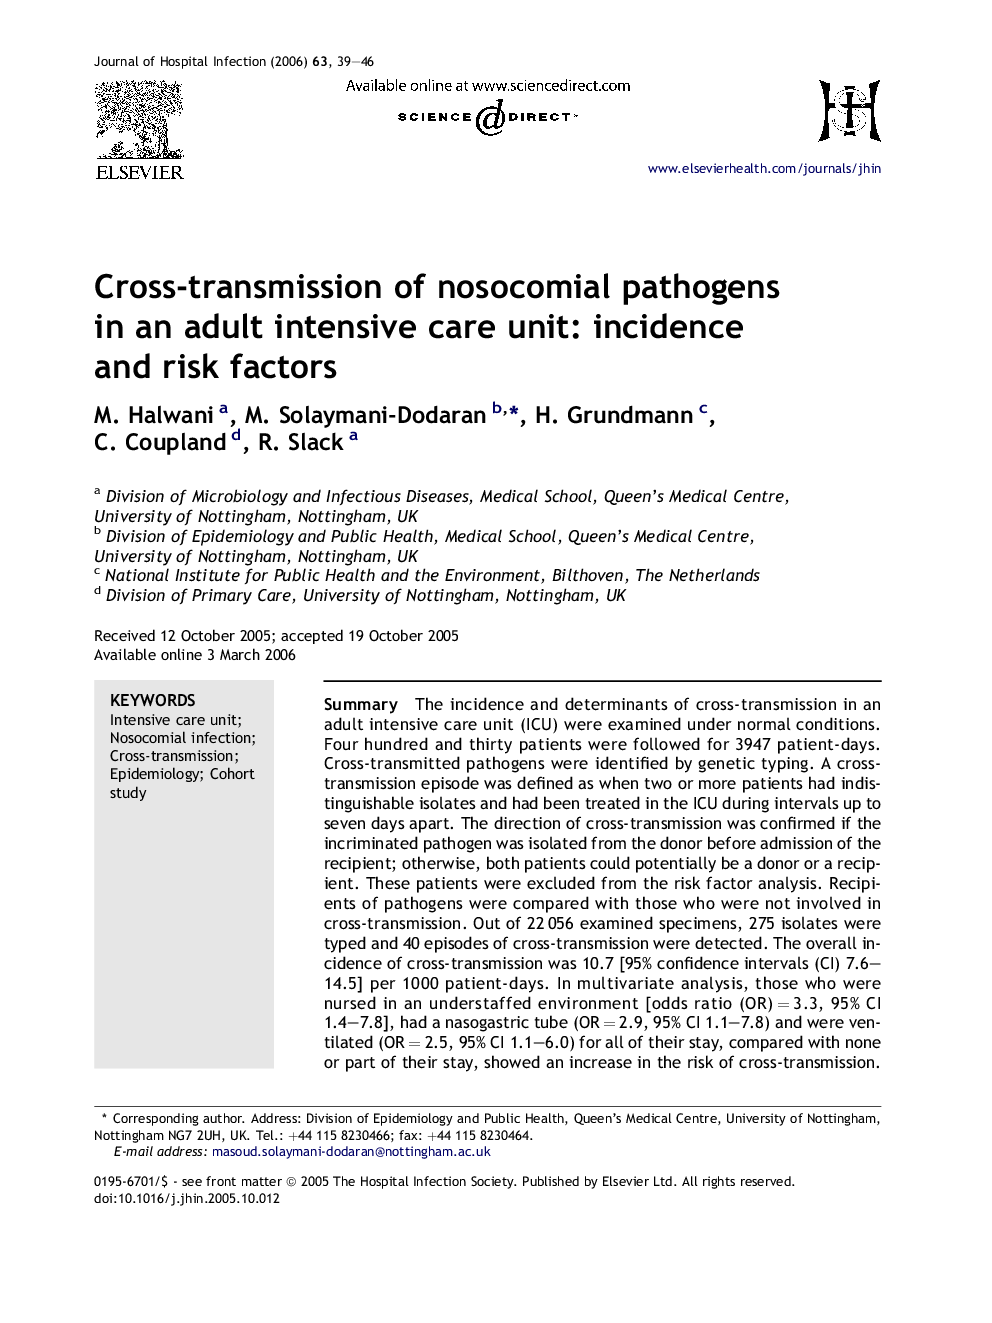 Cross-transmission of nosocomial pathogens in an adult intensive care unit: incidence and risk factors